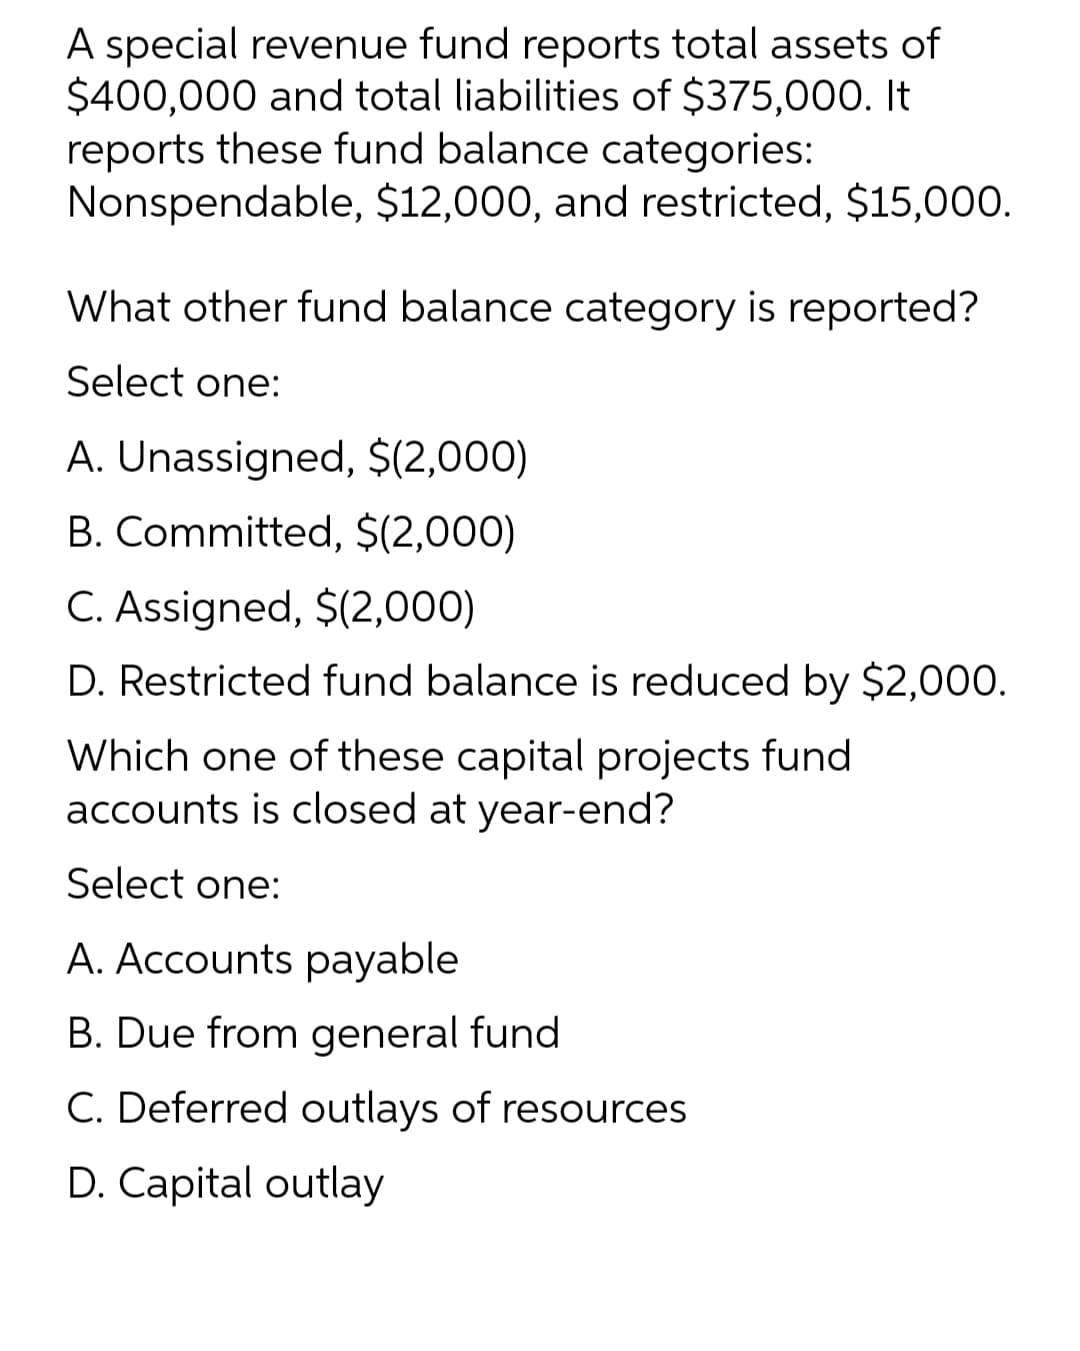 A special revenue fund reports total assets of
$400,000 and total liabilities of $375,000. It
reports these fund balance categories:
Nonspendable, $12,000, and restricted, $15,000.
What other fund balance category is reported?
Select one:
A. Unassigned, $(2,000)
B. Committed, $(2,000)
C. Assigned, $(2,000)
D. Restricted fund balance is reduced by $2,000.
Which one of these capital projects fund
accounts is closed at year-end?
Select one:
A. Accounts payable
B. Due from general fund
C. Deferred outlays of resources
D. Capital outlay
